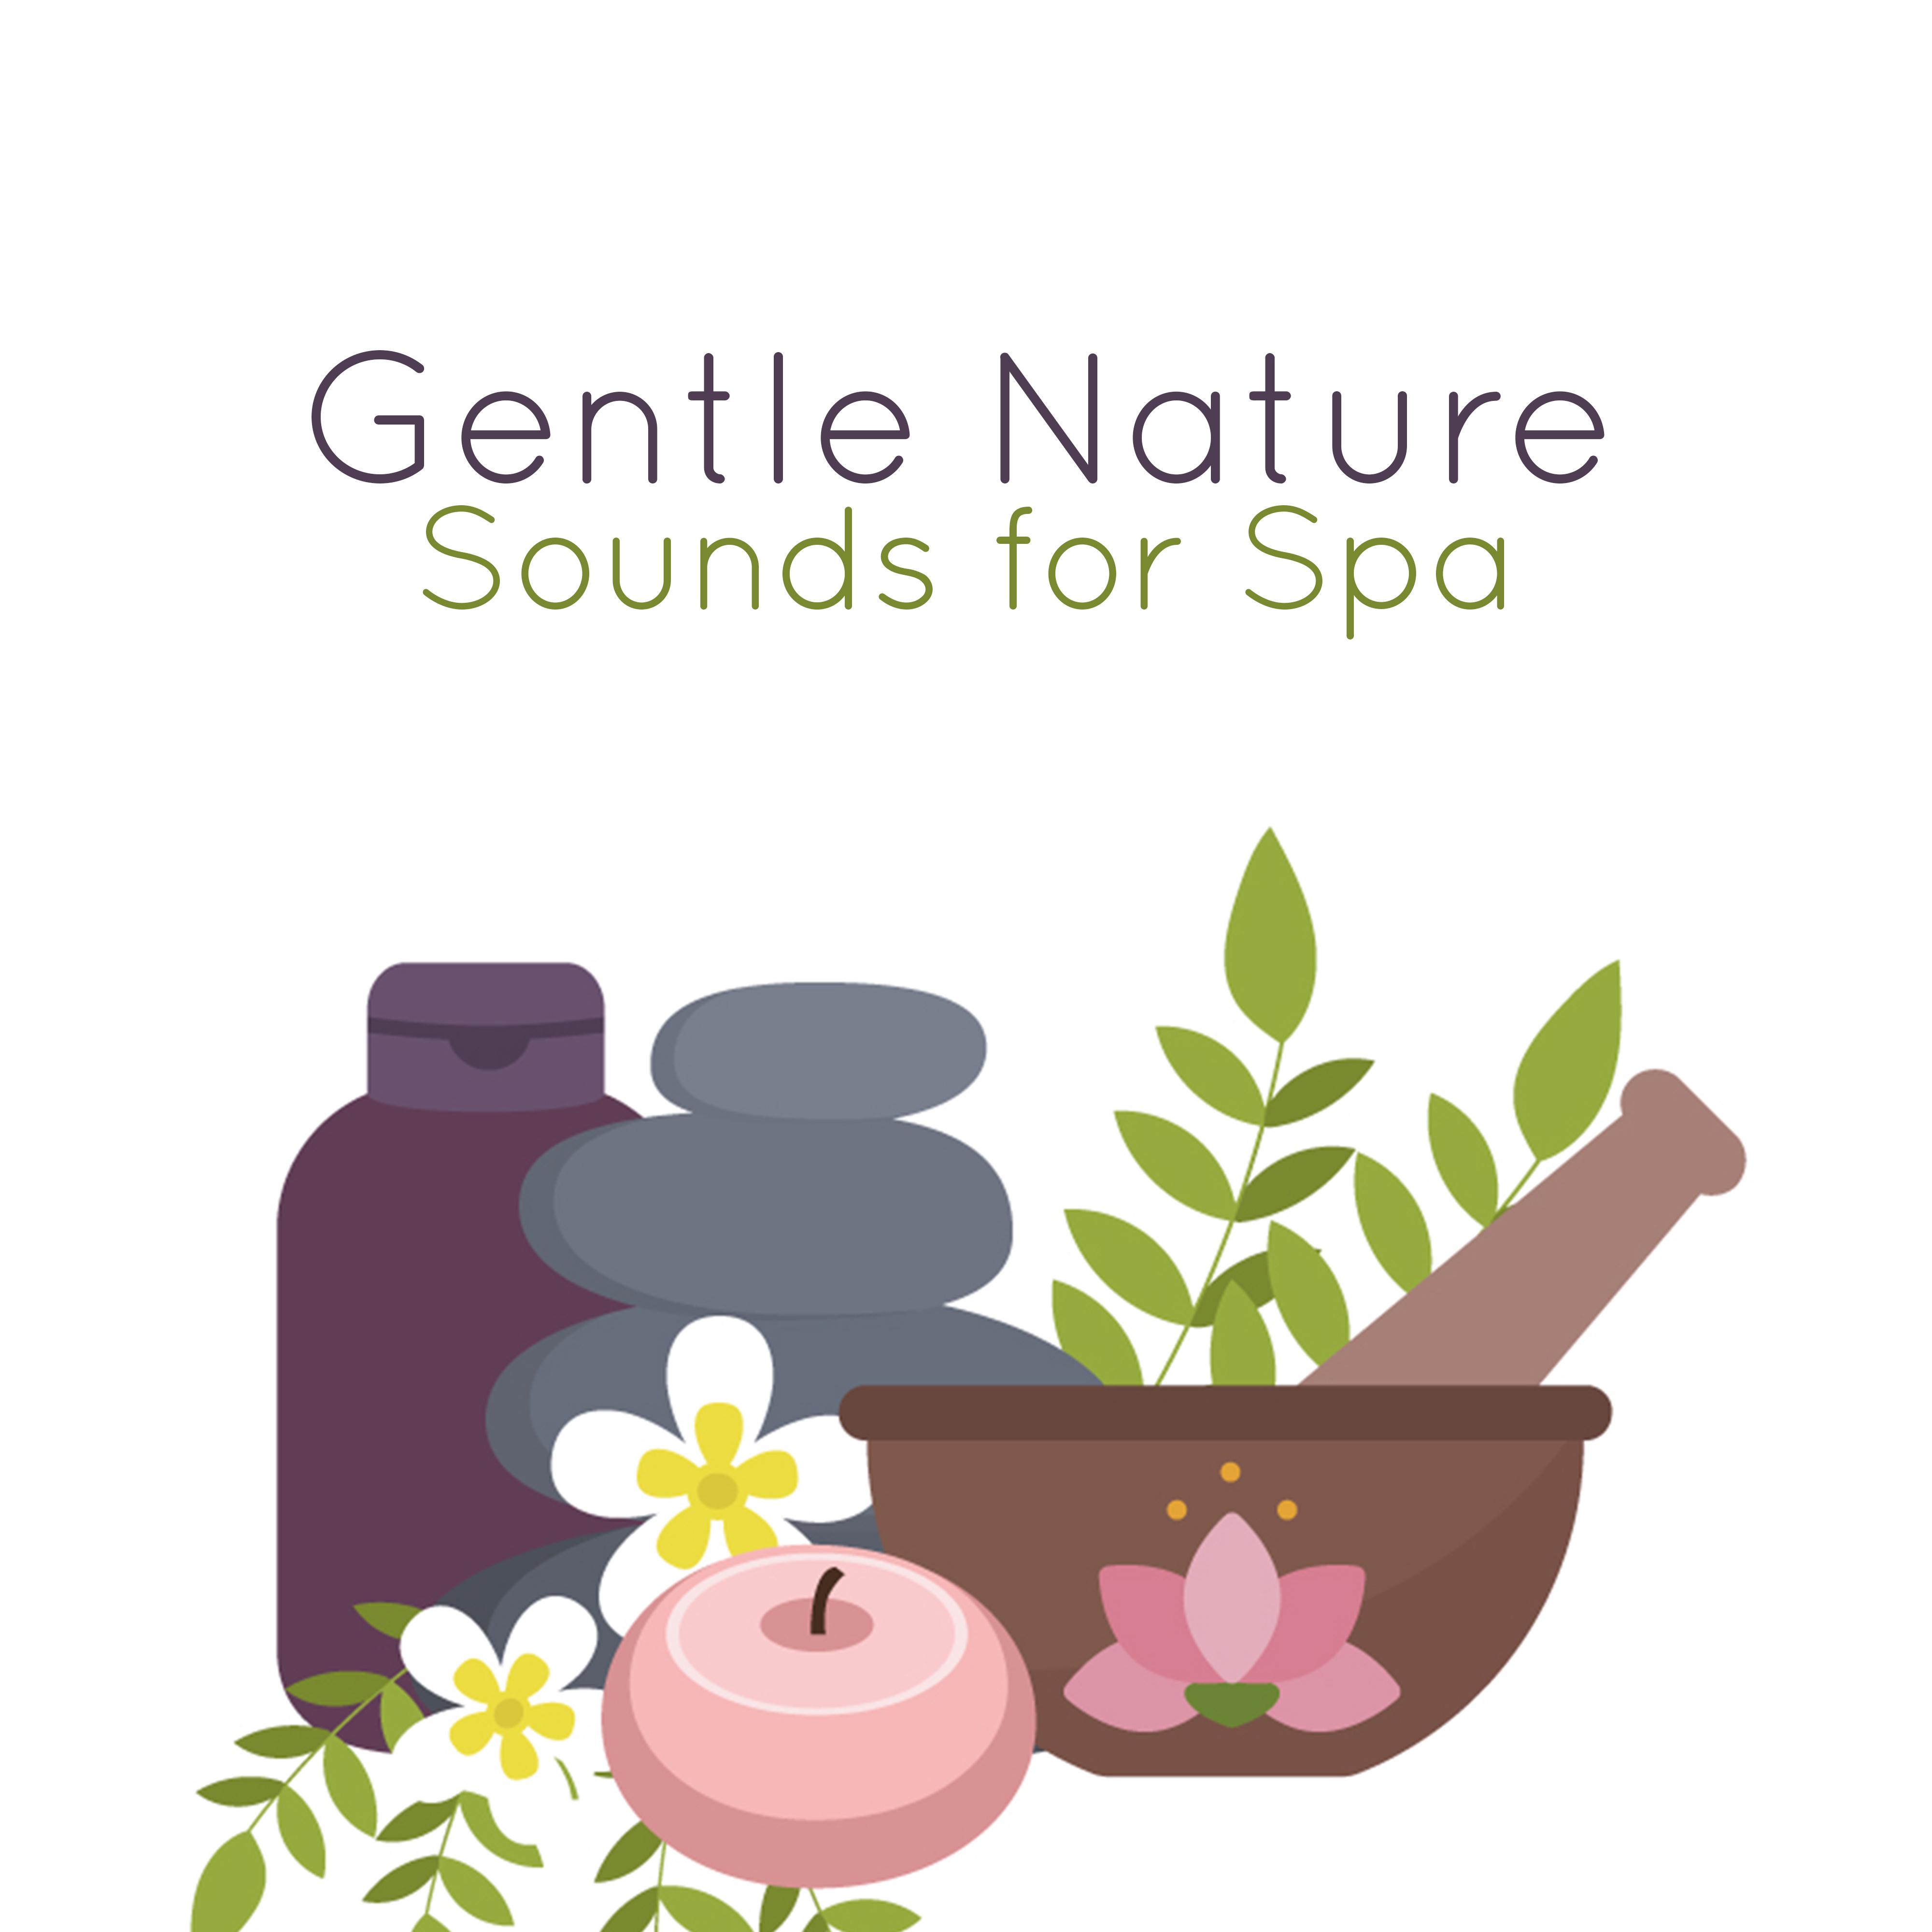 Gentle Nature Sounds for Spa